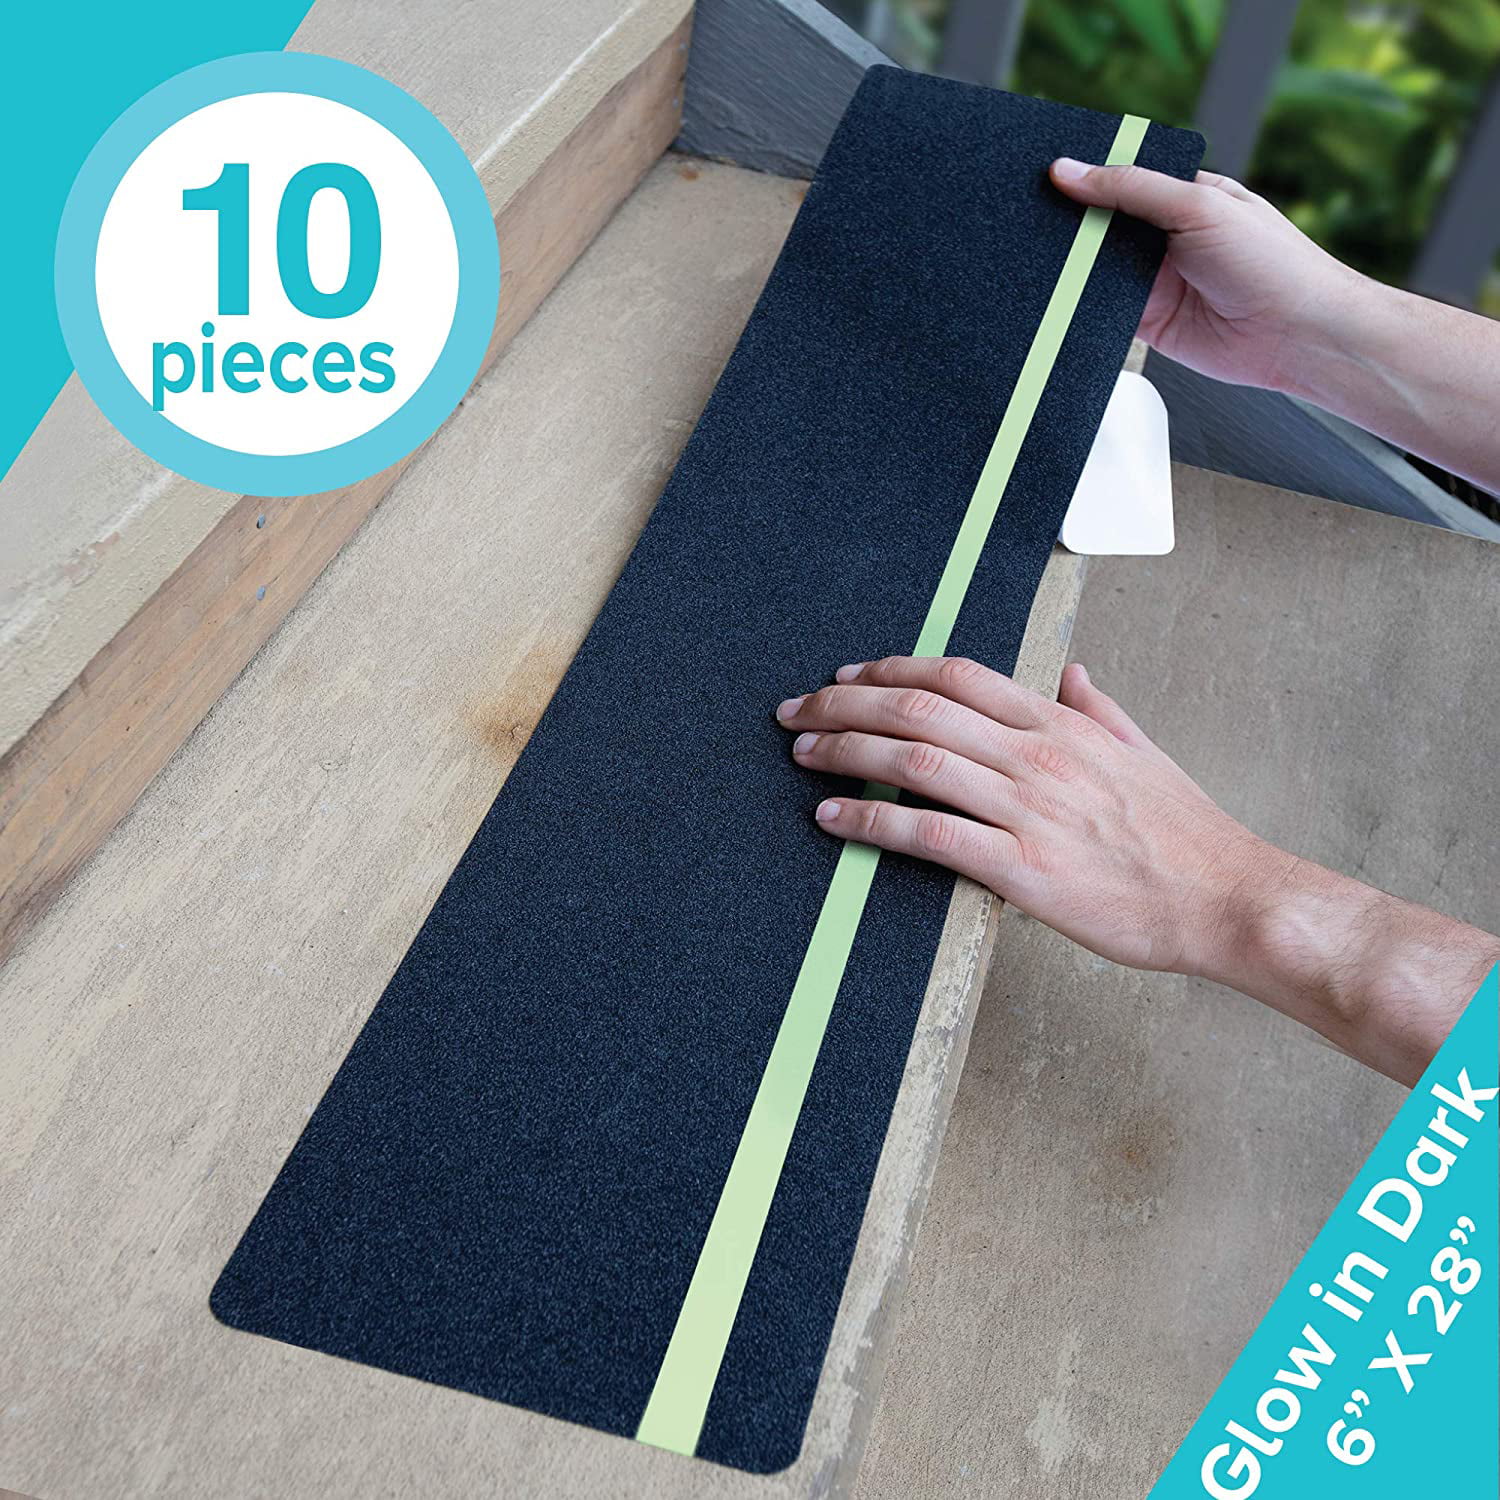 Glow In Dark Safety Tape Anti Slip Traction Grip Friction Abrasive Adhesive tape 